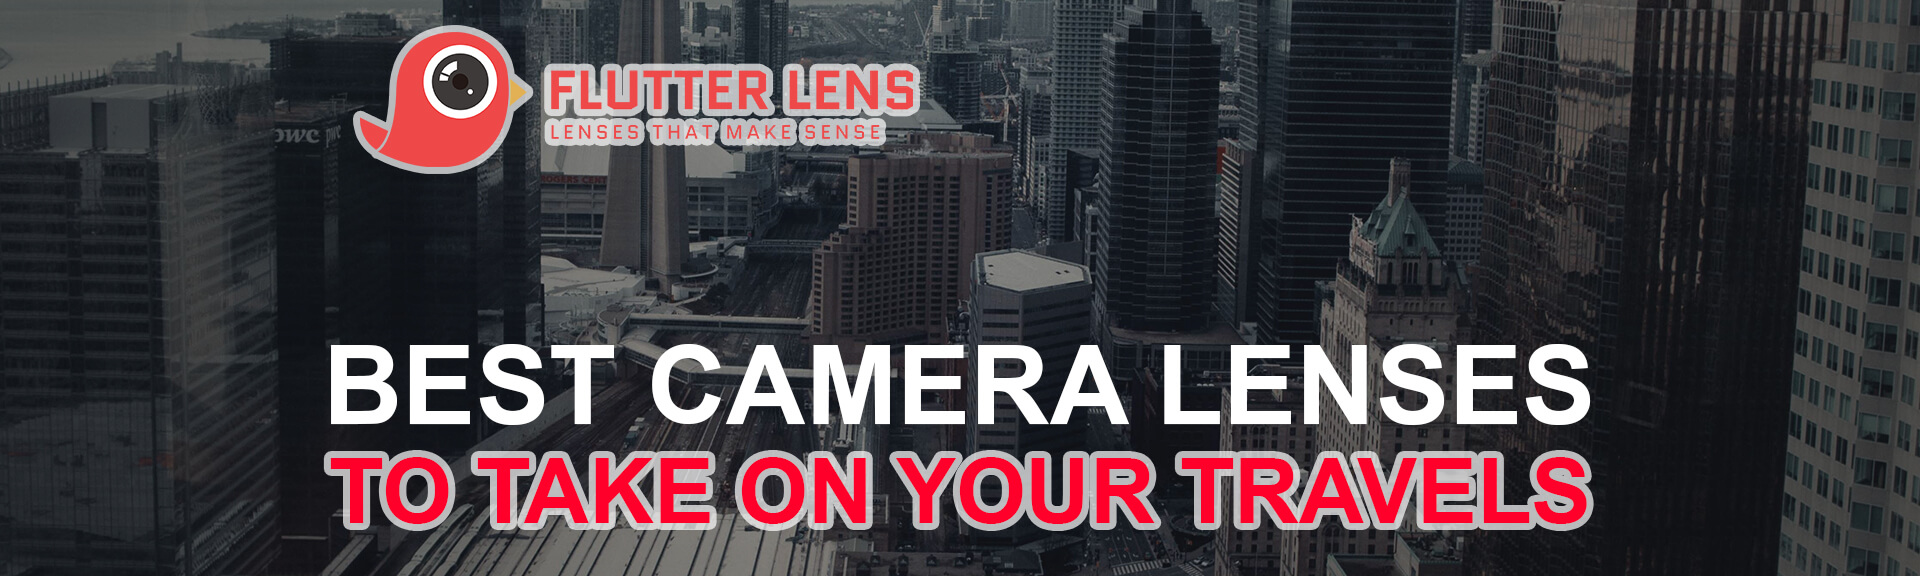 Best Camera Lenses To Take On Your Travels